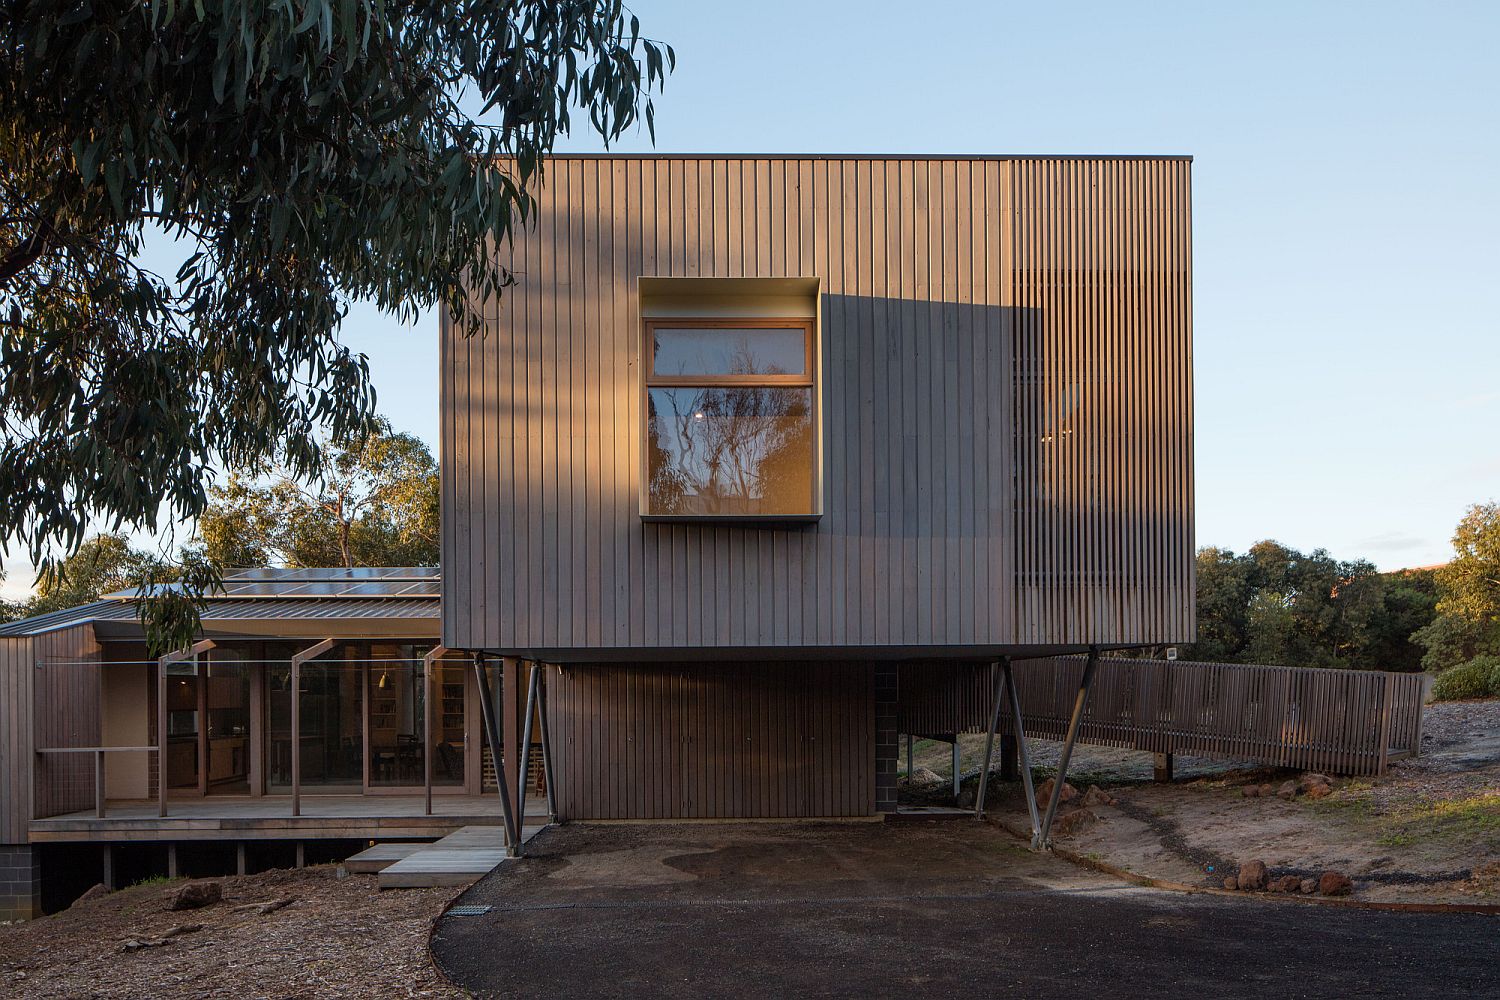 Concrete-and-wood-Aussie-home-with-cantilevered-design